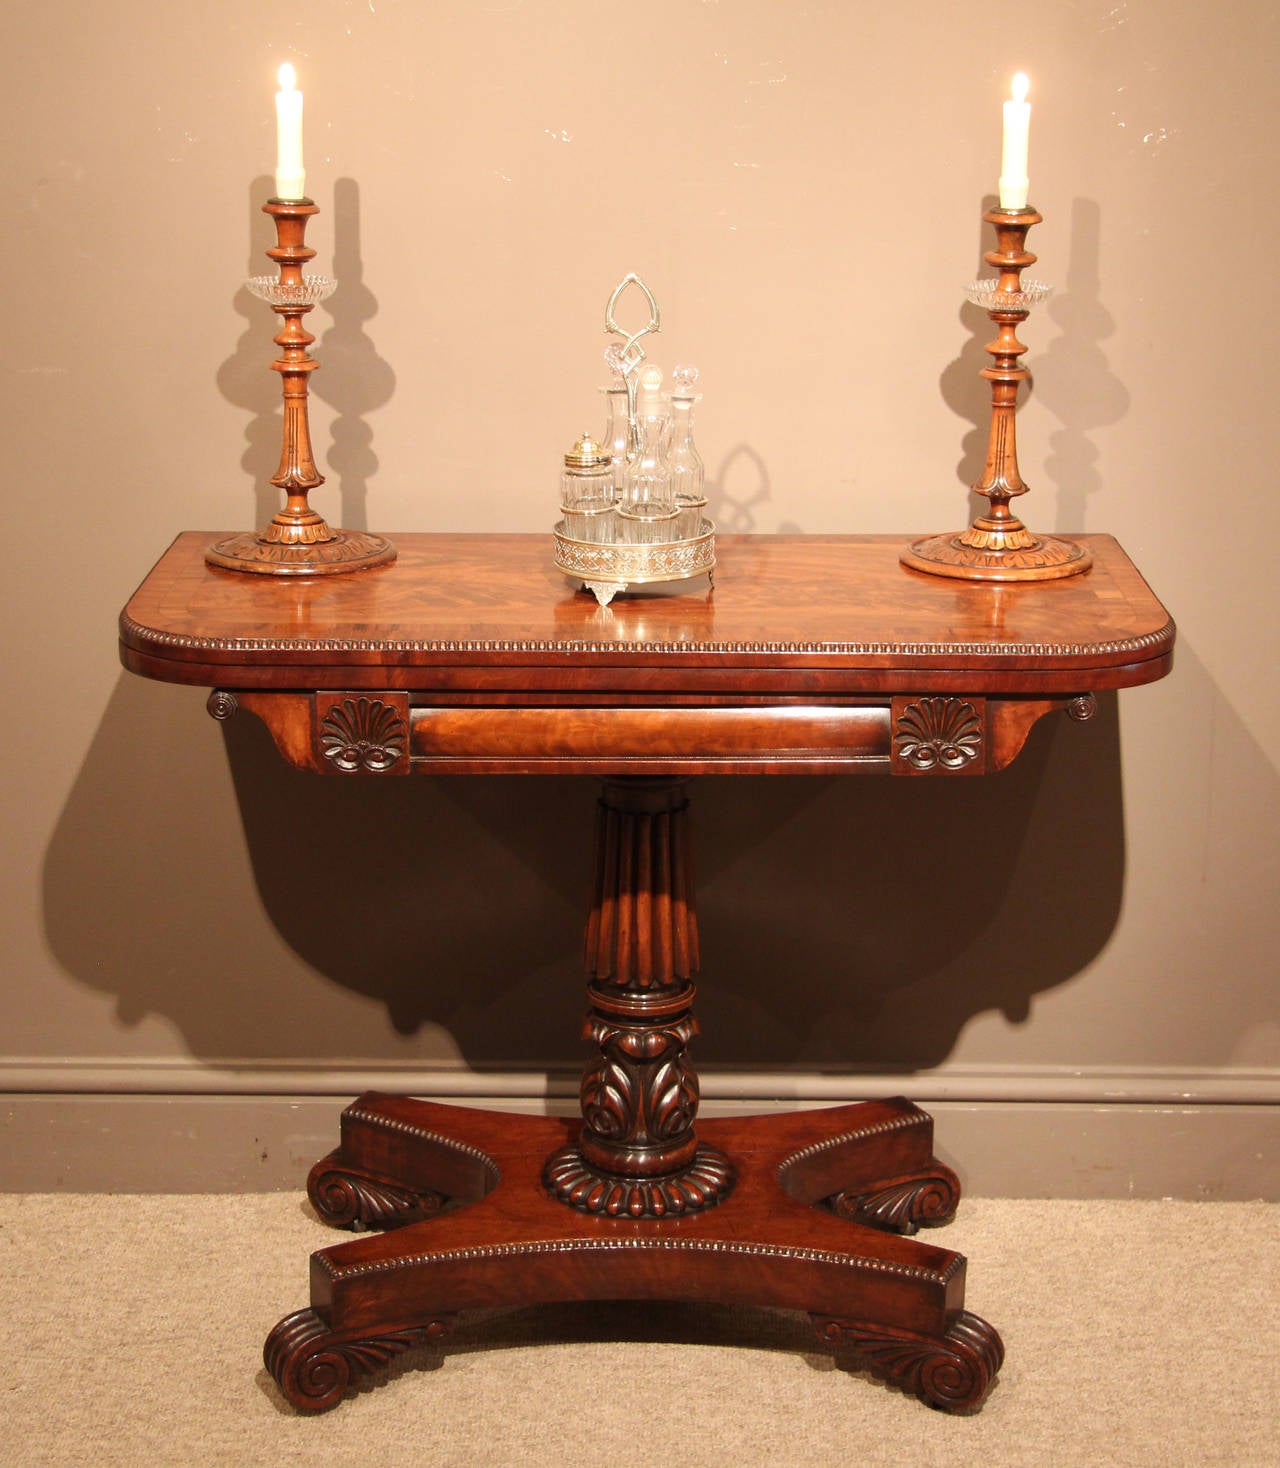 A superb late Regency mahogany card table with carved shell motifs and reel decorated edges in quadraform base with baize-lined interior surface, circa 1815. 

All of the items that we advertise for sale have been as accurately described as